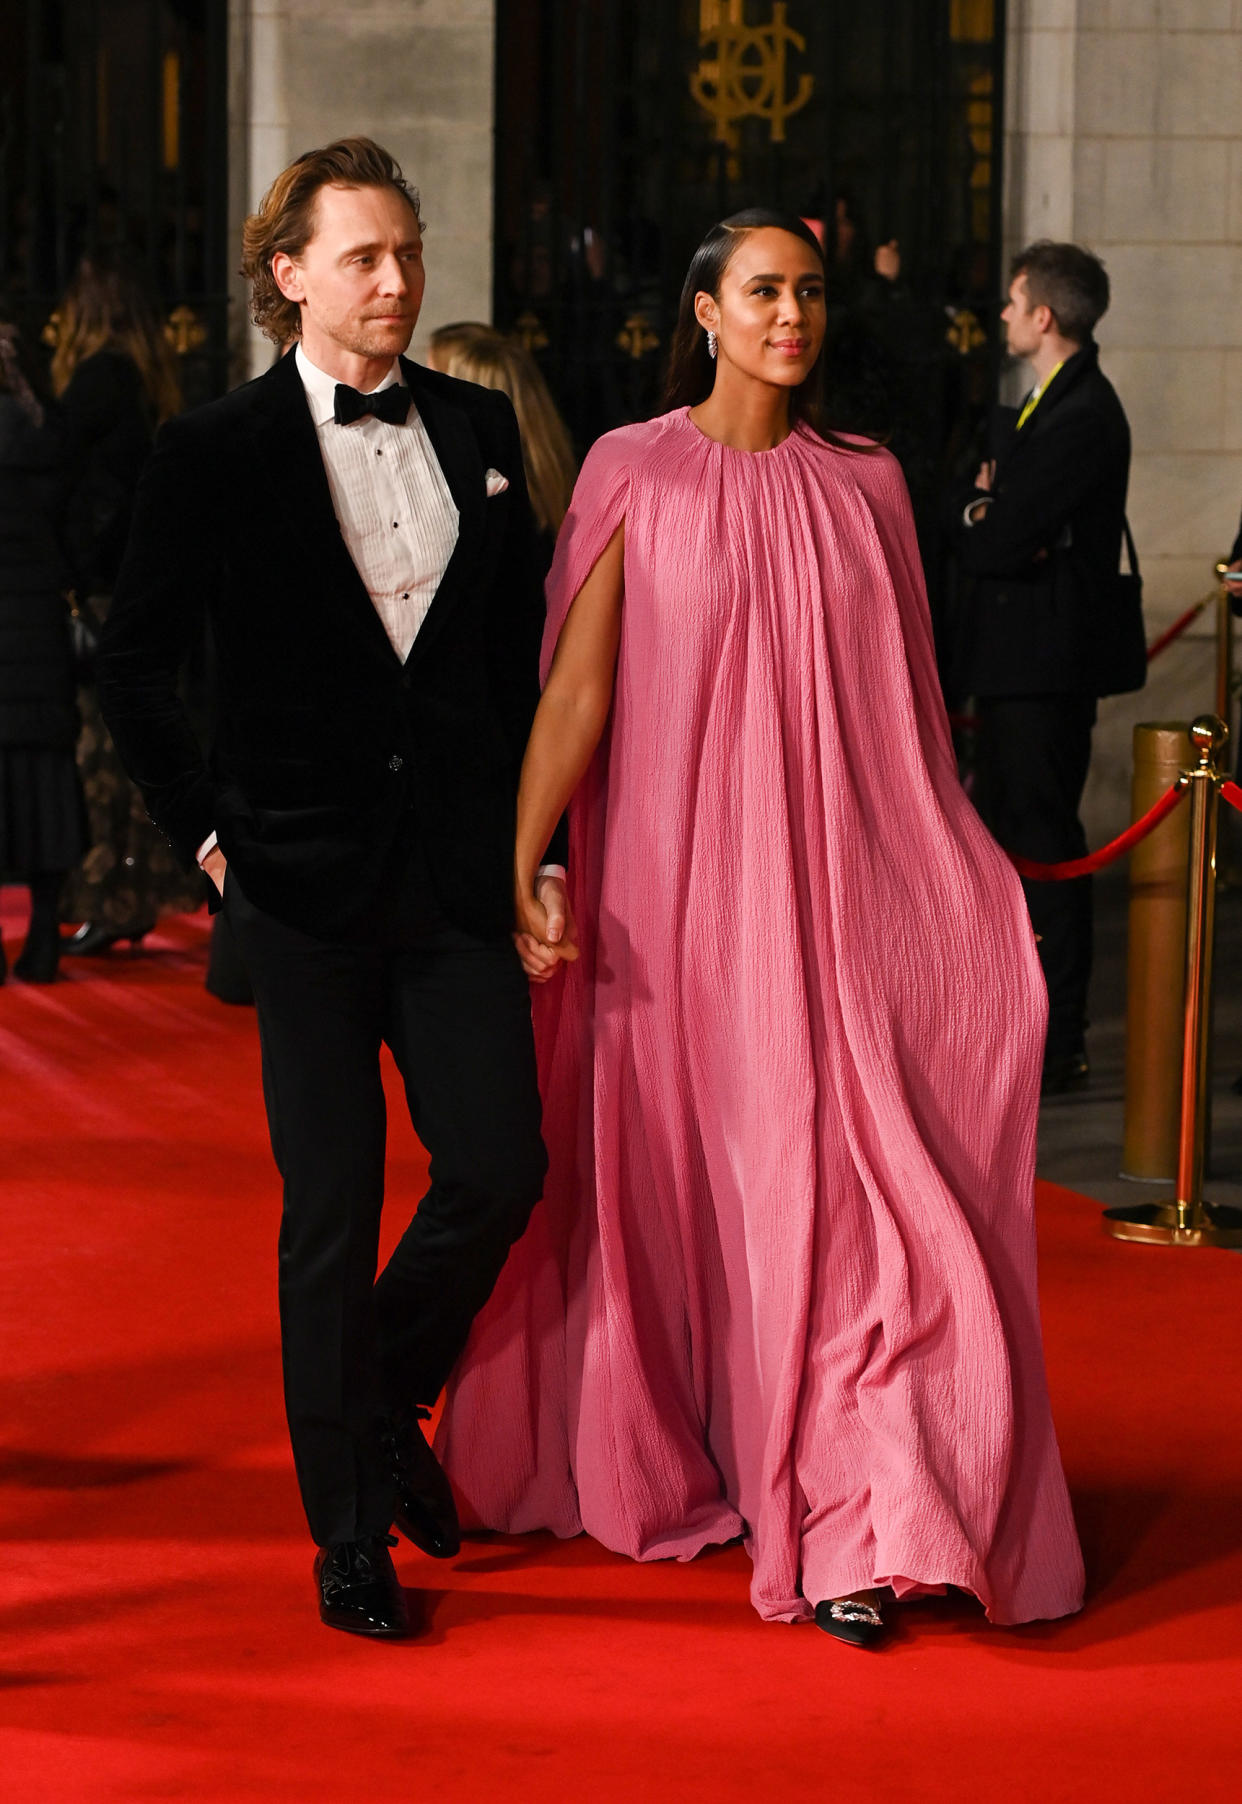 Hiddleston and Ashton were all glamour as they attended the BAFTAs in March, the same month they got engaged. (Kate Green / Getty Images)